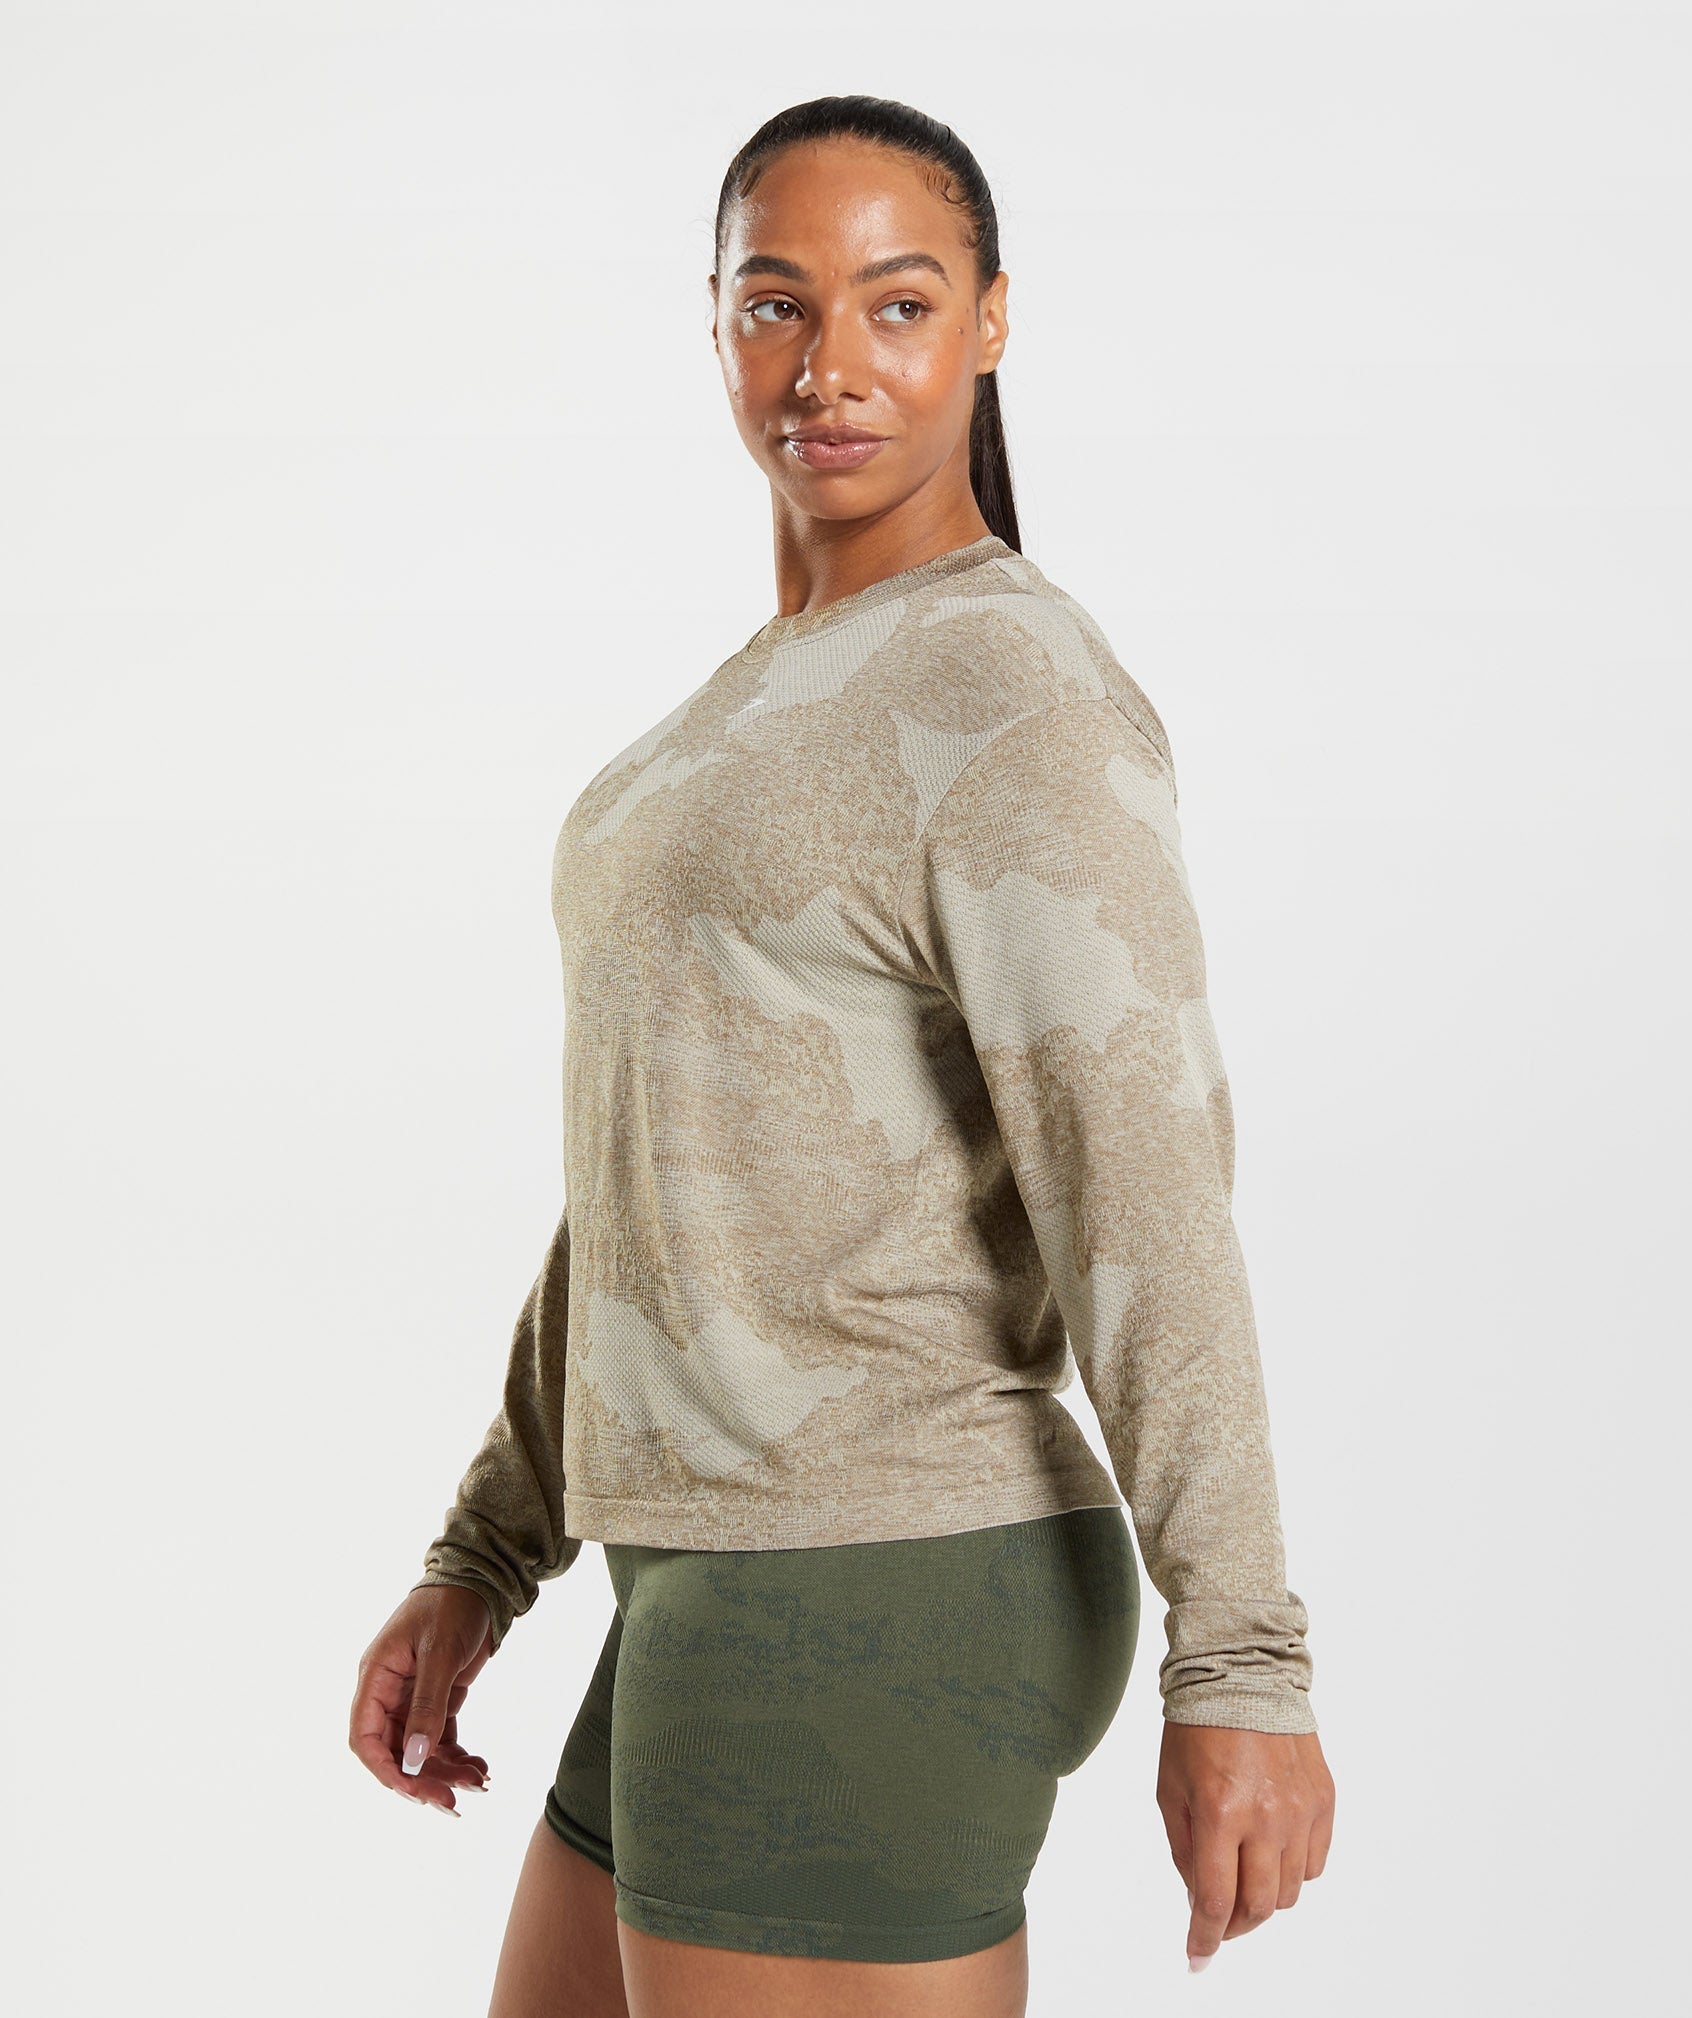 Adapt Camo Seamless Long Sleeve Top in Pebble Grey/Soul Brown - view 3